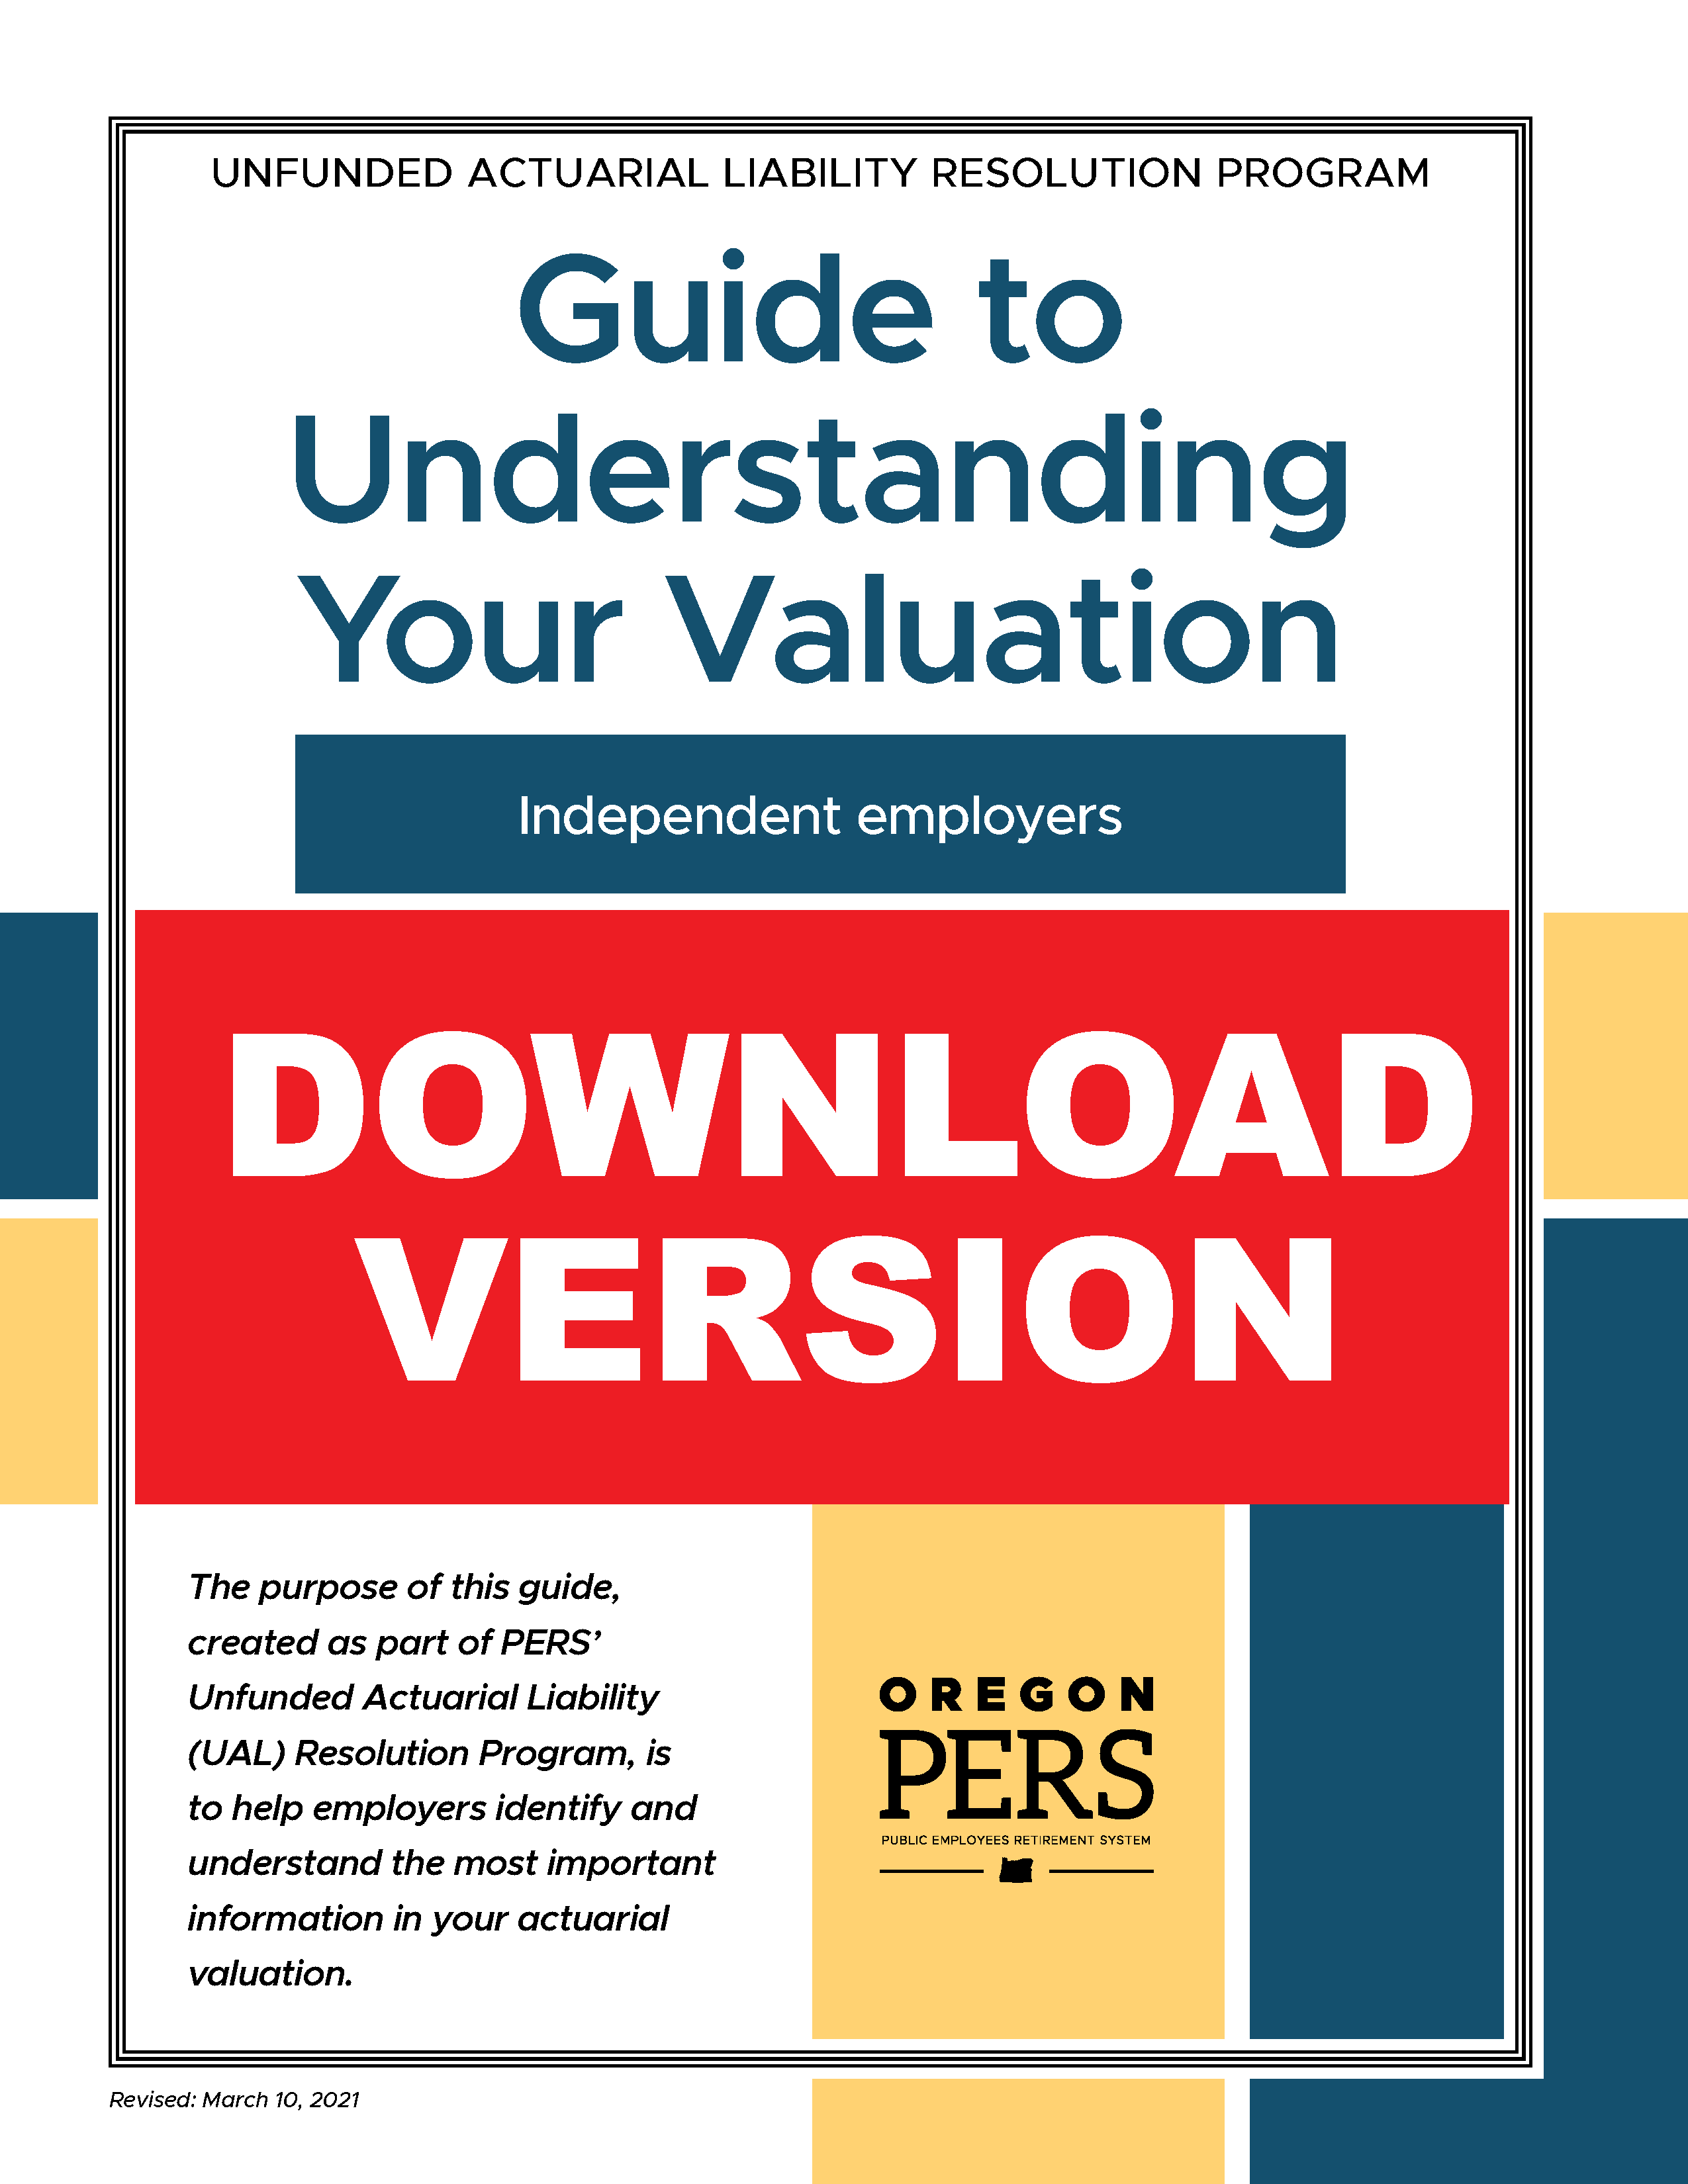 Cover image for PDF document Guide to Understanding Your Valuation - Independents download version